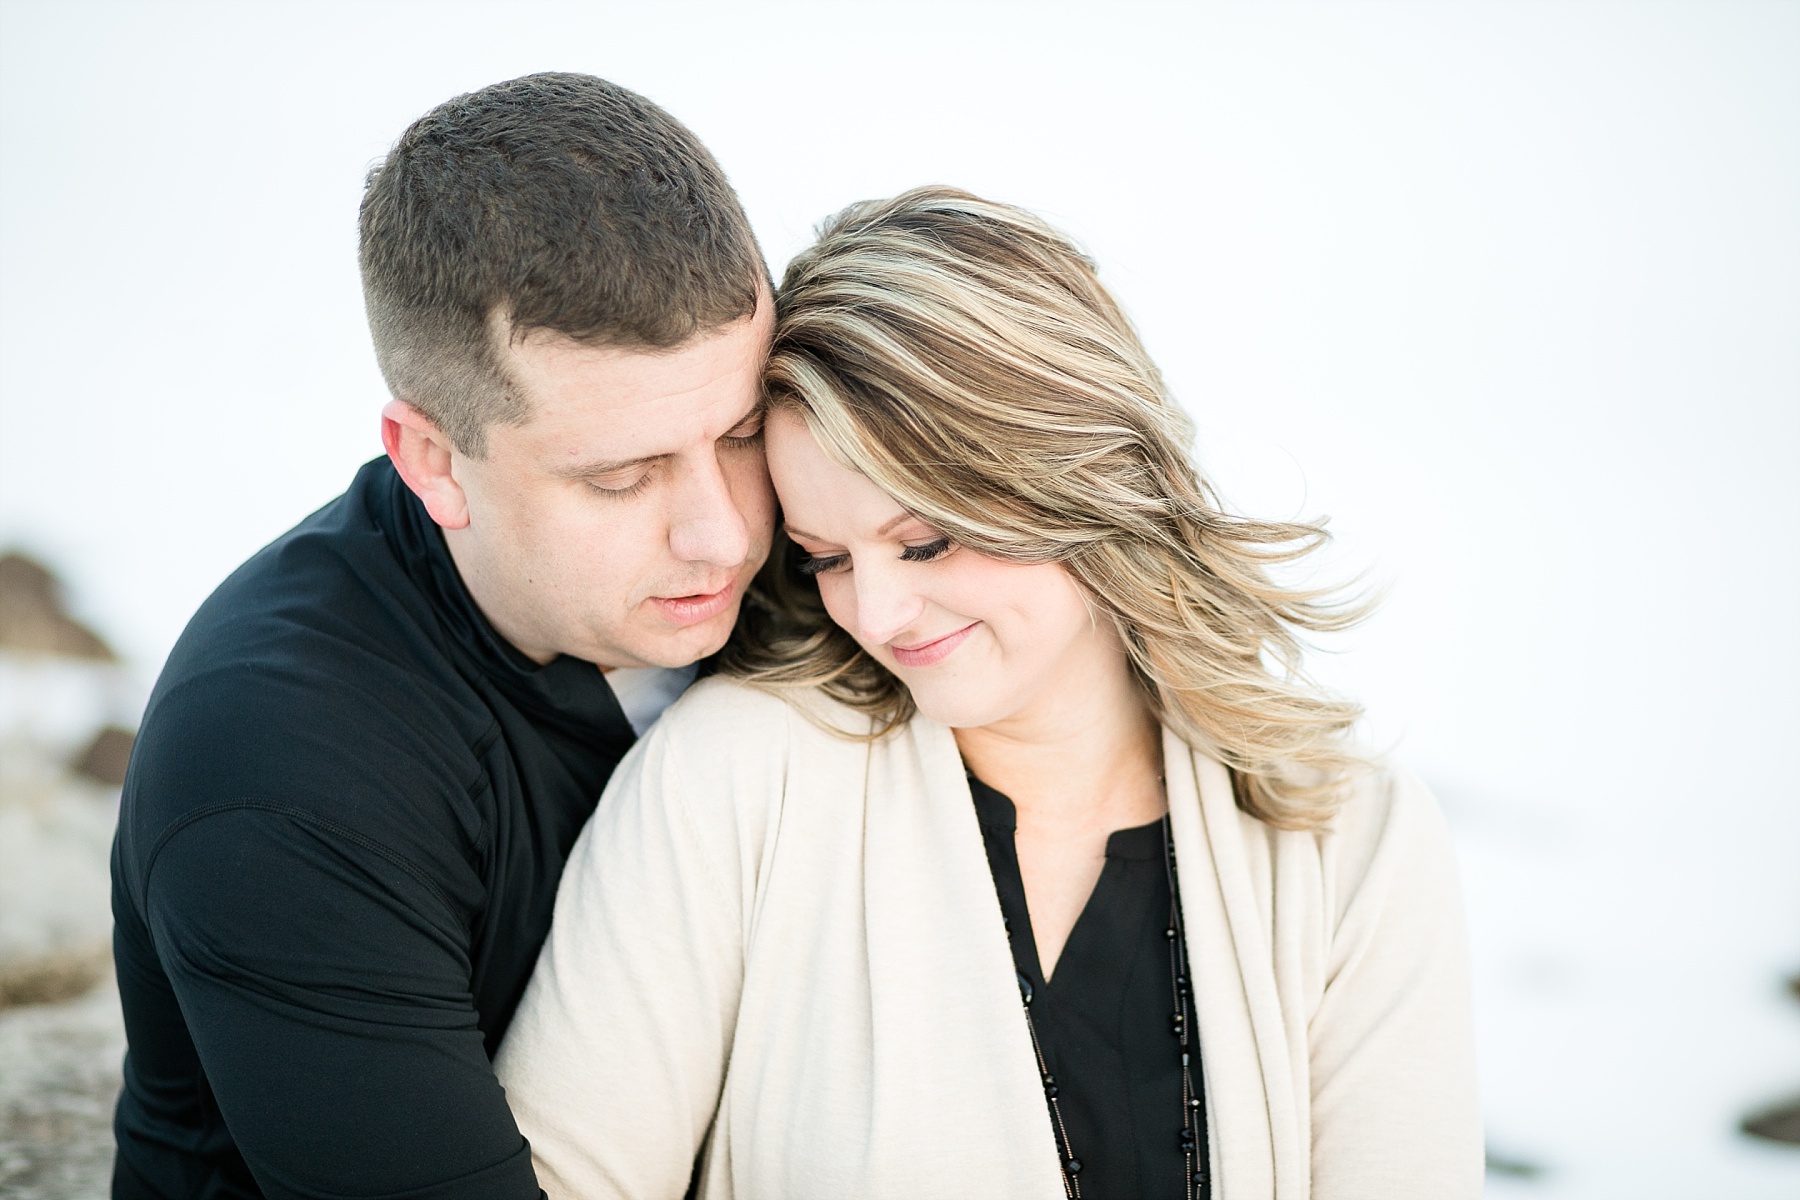 A little warm up made for the perfec Winter eau claire engagement photos for Nicole & Travis.